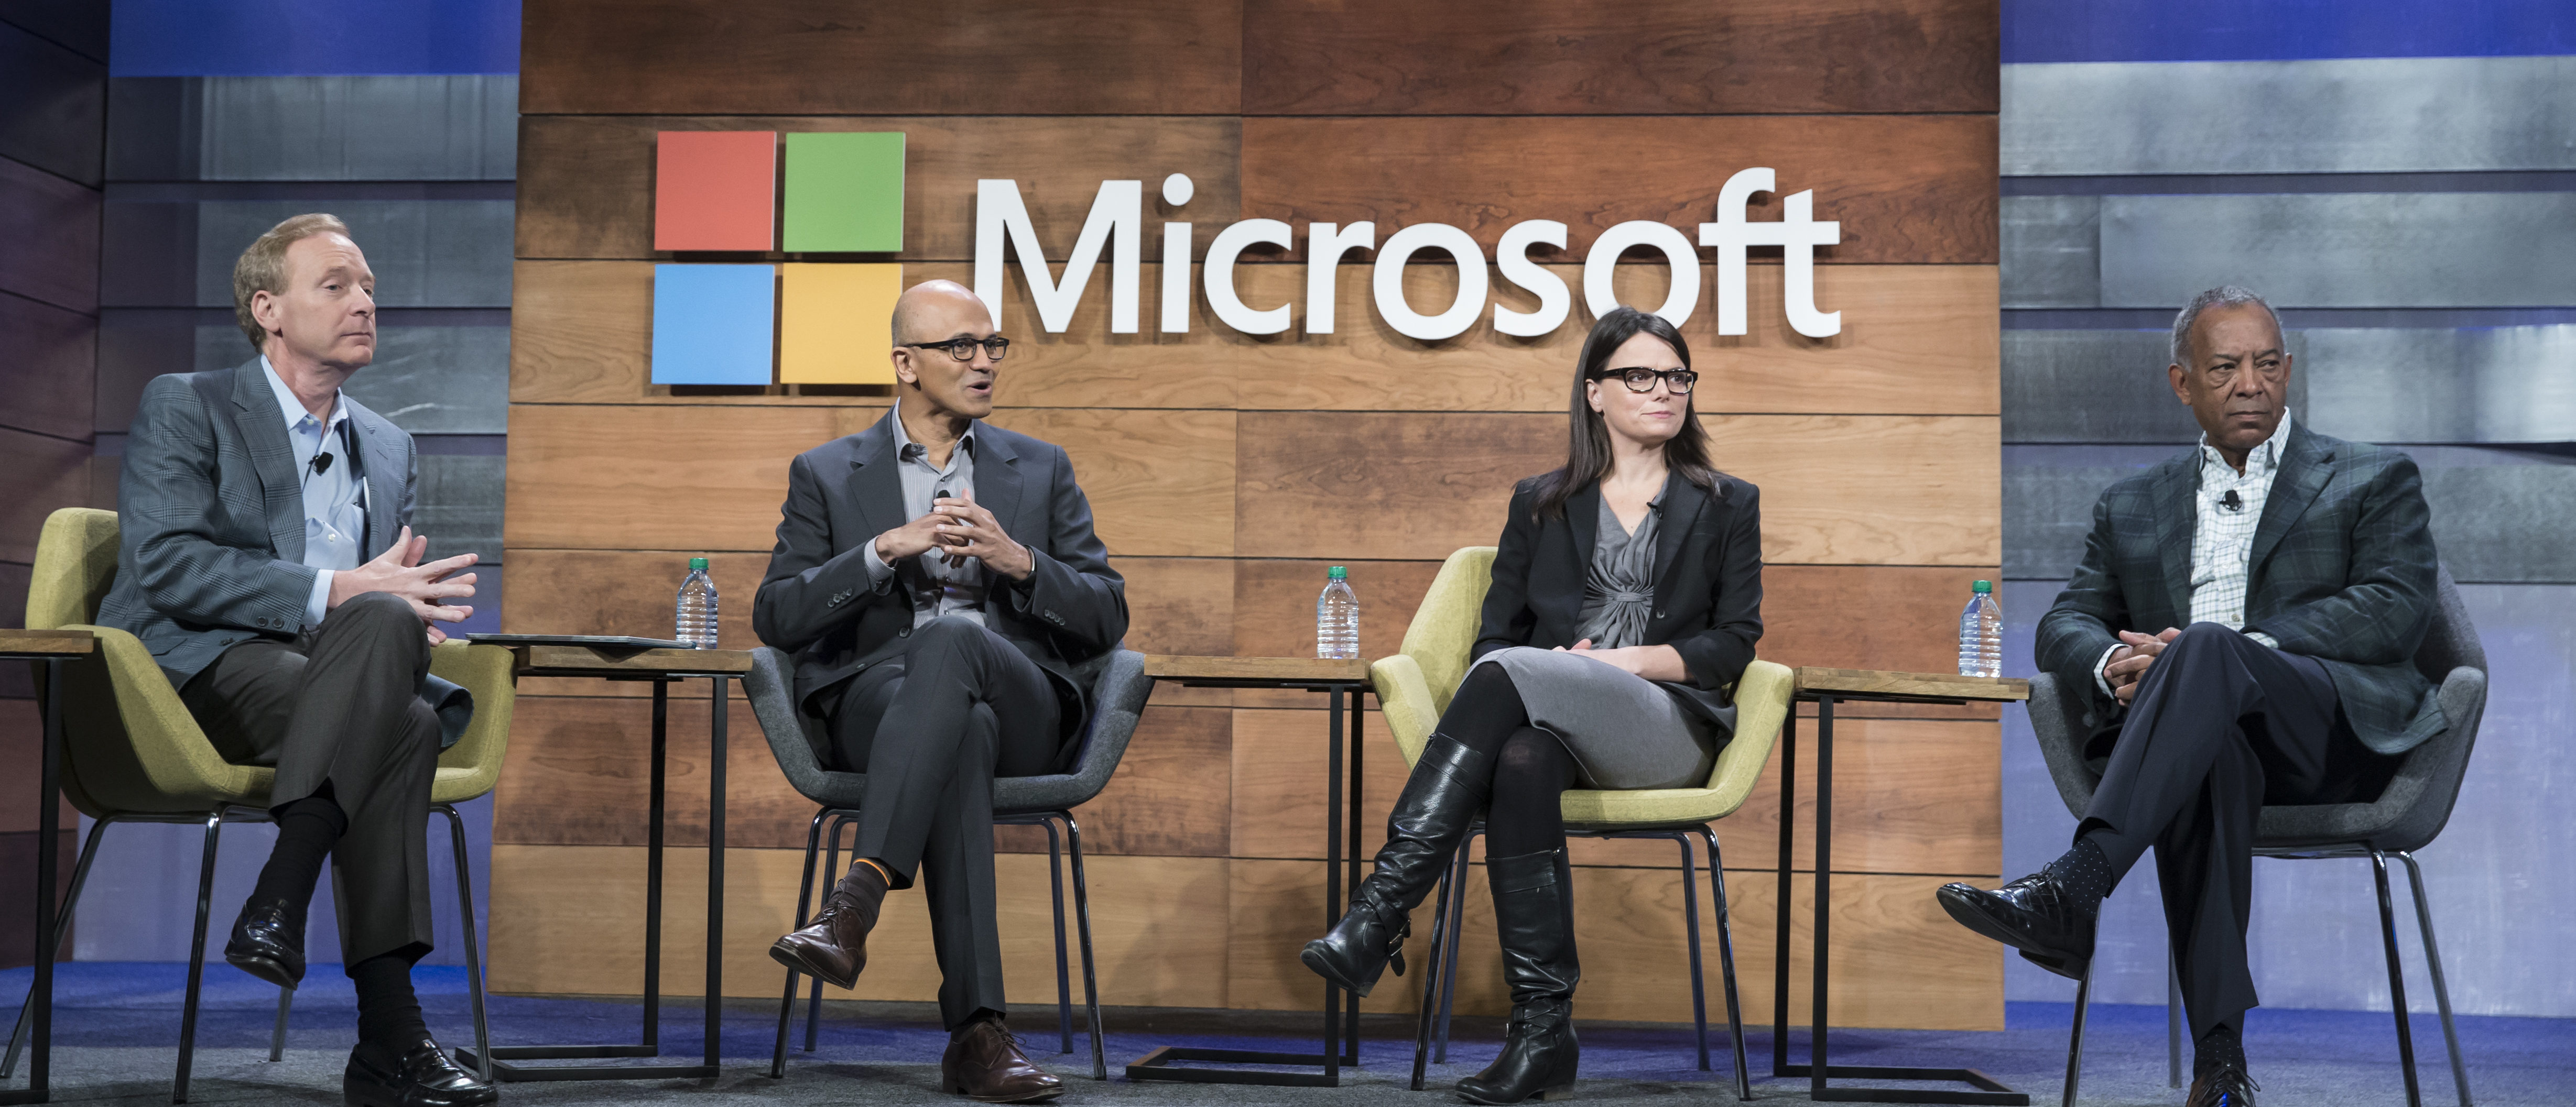 BELLEVUE, WA - DECEMBER 2: From left, Microsoft General Counsel and Executive Vice President Brad Smith Microsoft CEO Satya Nadella, Microsoft CFO and Executive Vice President Amy Hood and Microsoft Chairman of the Board John Thompson take part in the "Question and Answer" Session during the Microsoft Annual Shareholders meeting, on December 2, 2015 in Bellevue, Washington. In addition to diversity effort, the company announced the addition to two women to its board of directors. (Photo by Stephen Brashear/Getty Images)